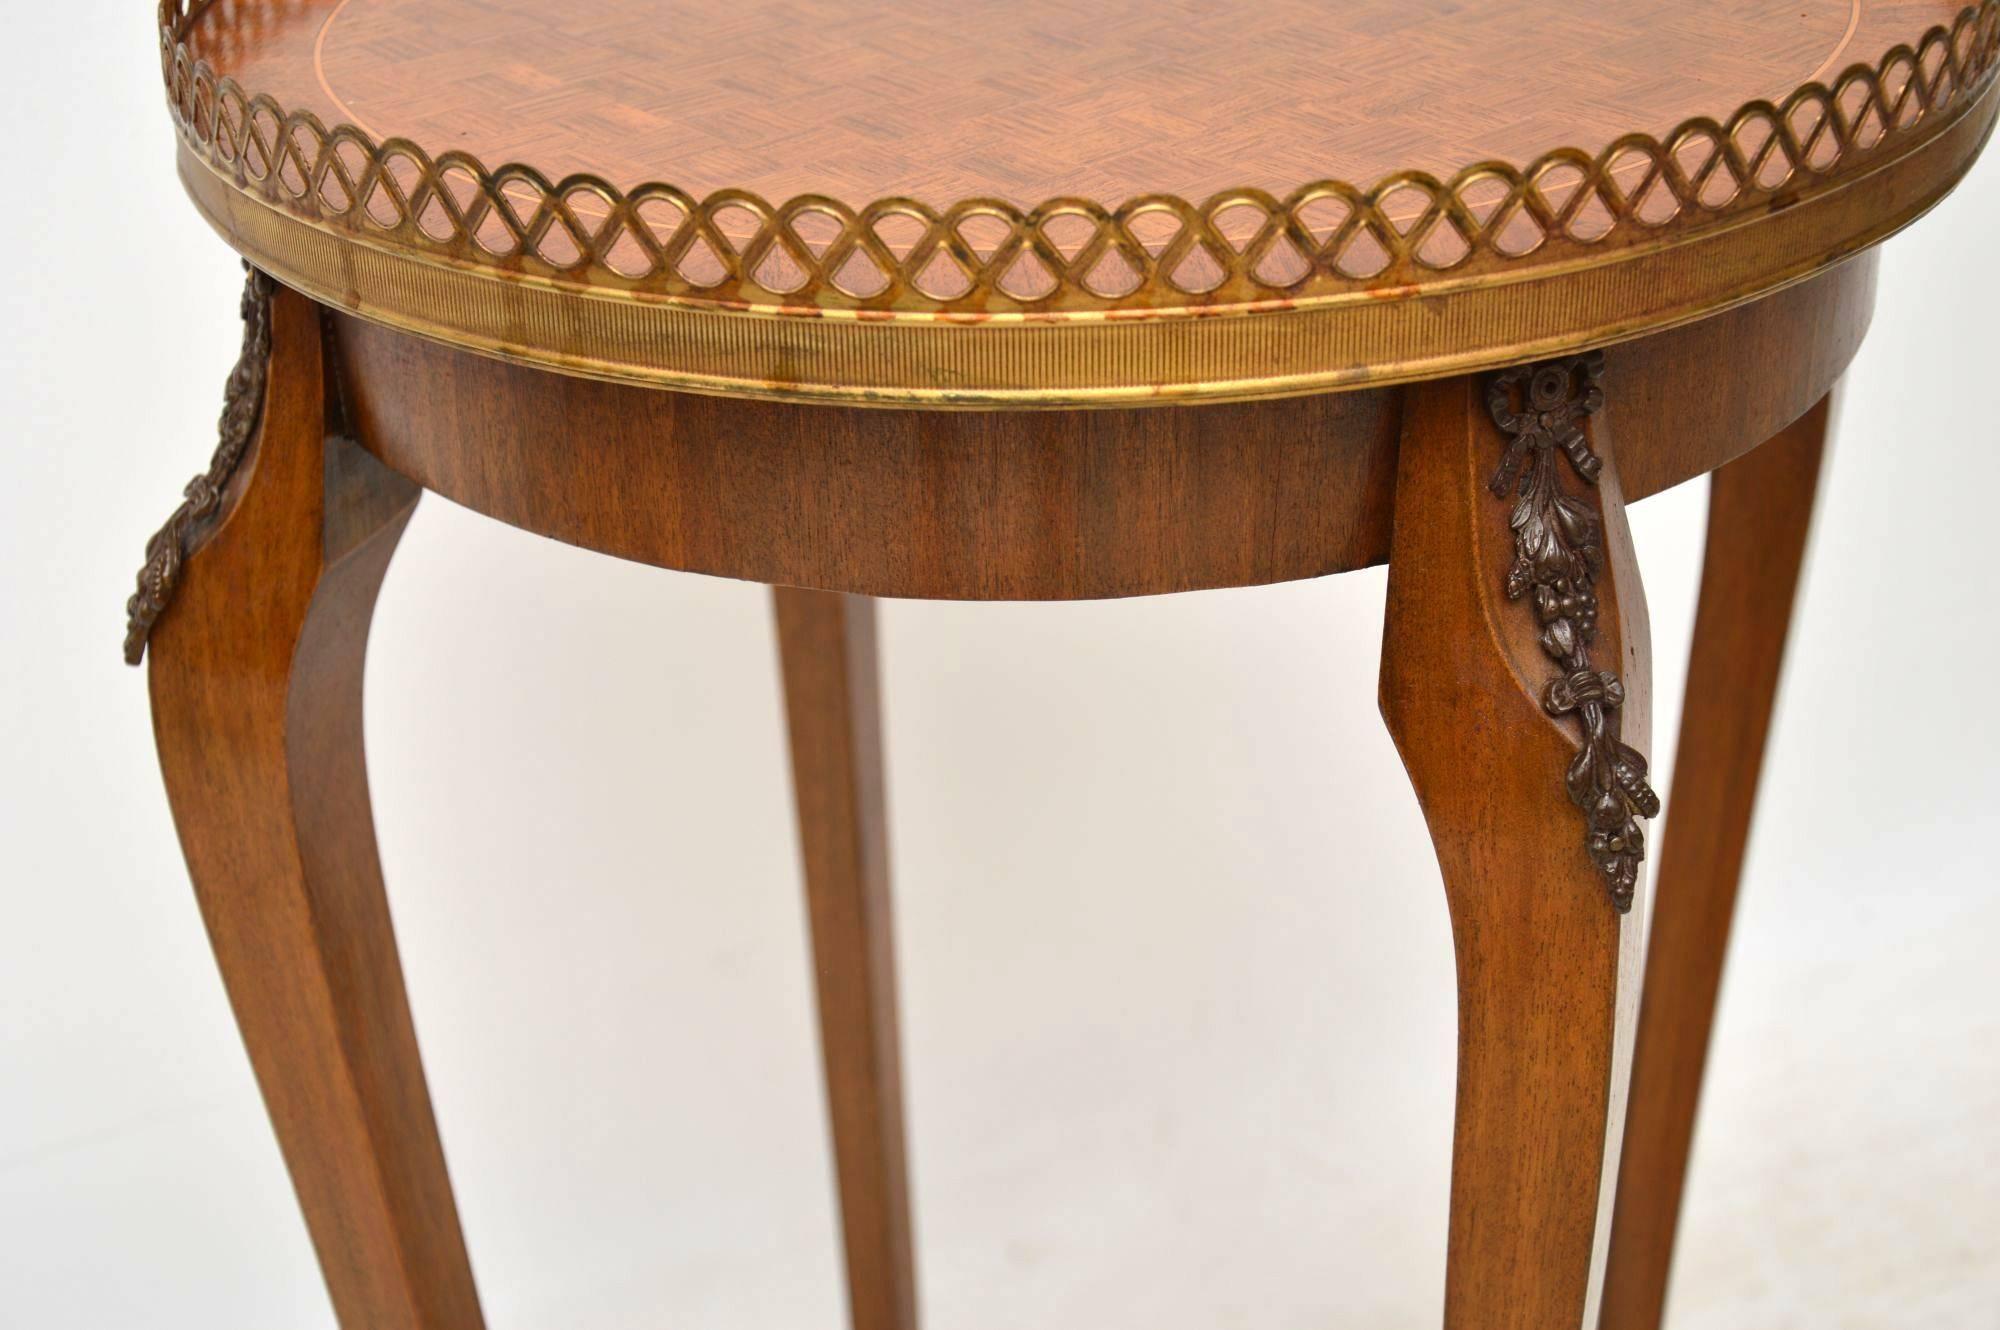 Early 20th Century Antique French Inlaid Parquetry Side Table